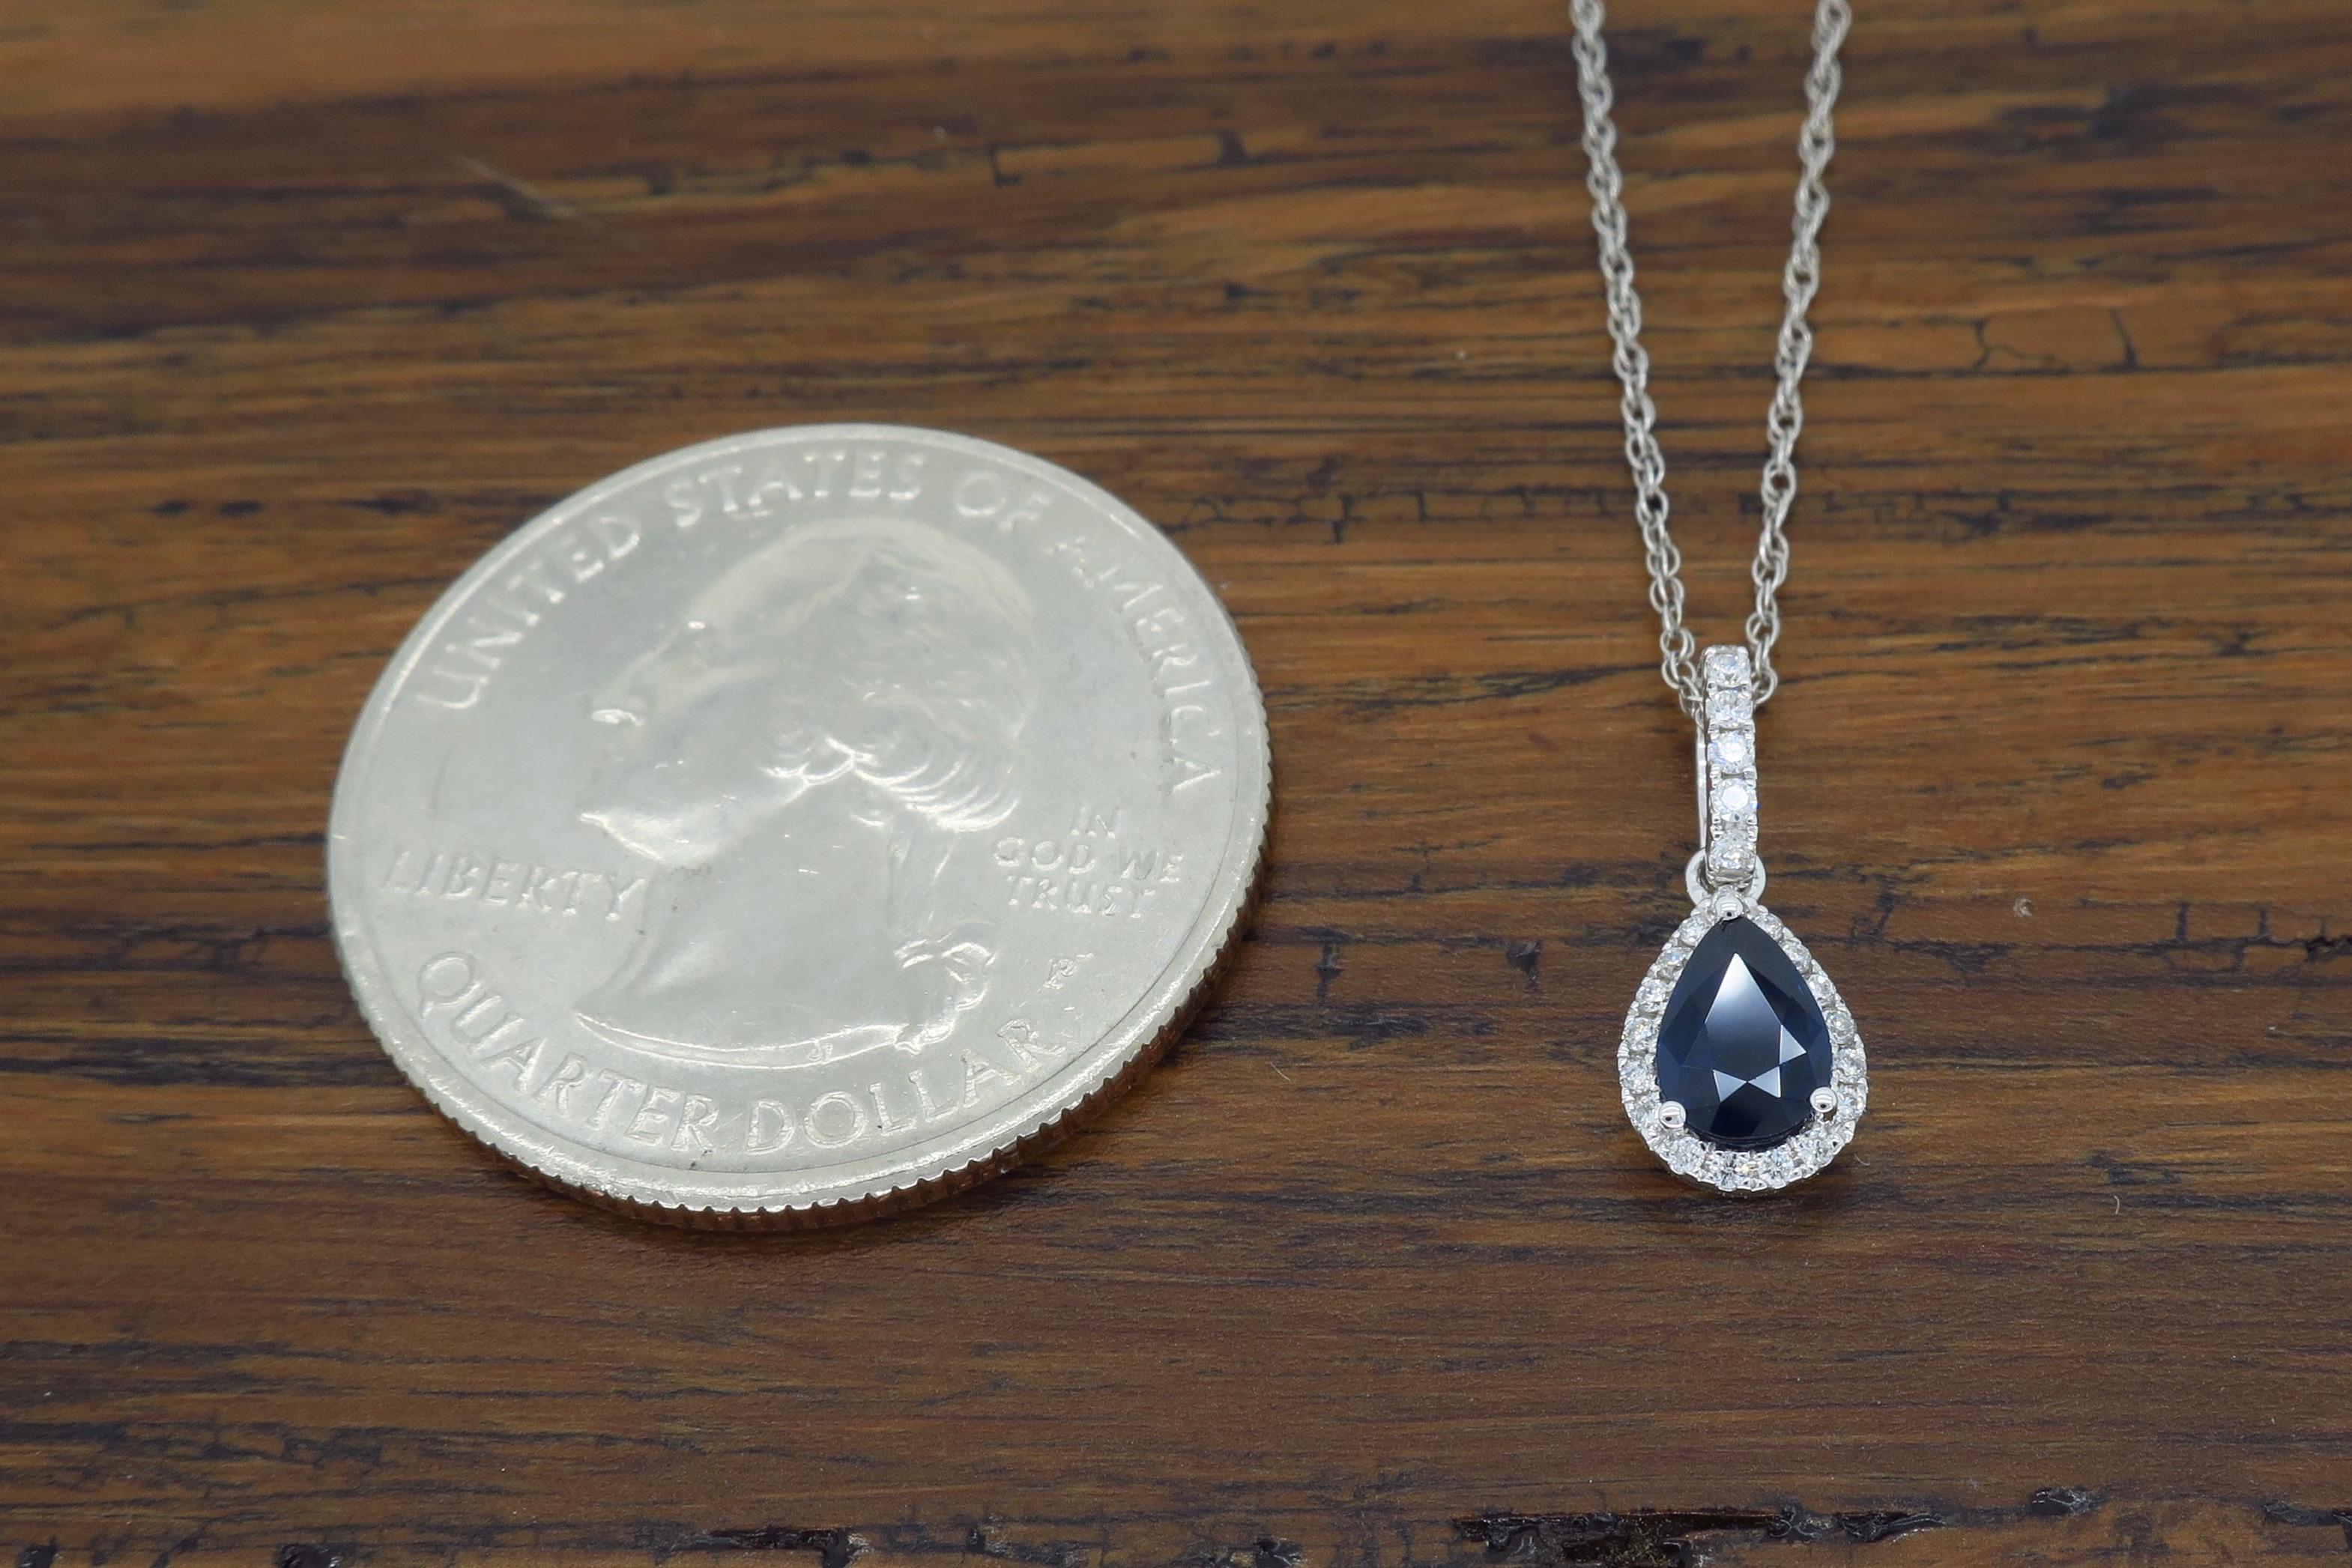 Stunning halo style necklace featuring a .47CT Pear Shaped Blue Sapphire surrounded by 32 Round Brilliant Cut Diamonds

Gemstone: Diamond & Blue Sapphire
Gemstone Carat Weight: .47CT Pear Shaped Blue Sapphire
Diamond Carat Weight: Approximately